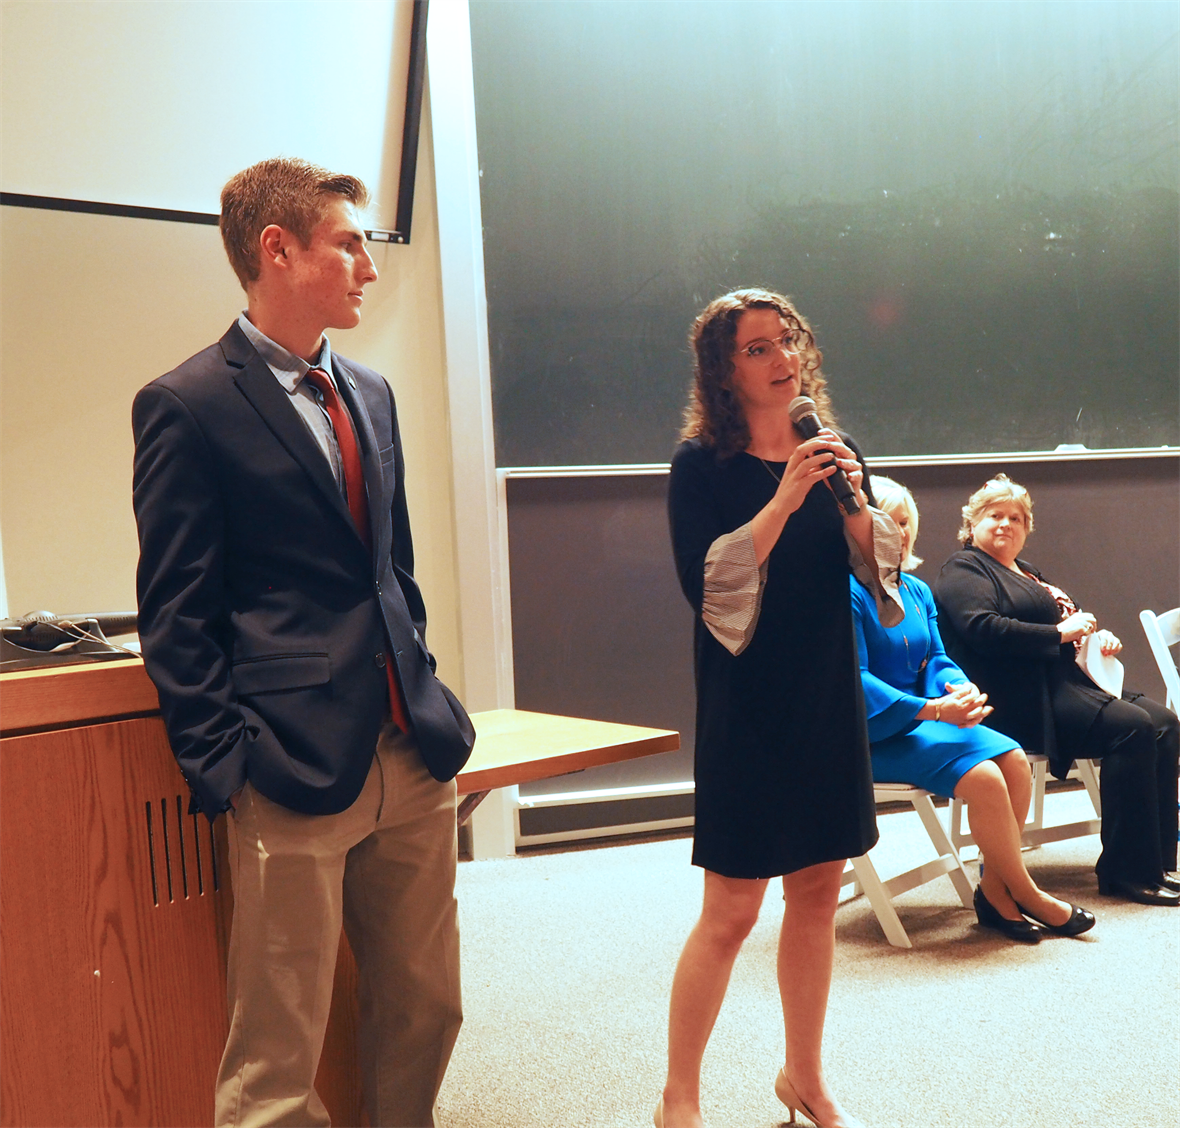 Eli Pardo, President of College Republicans (left) and Kelly Read, Vice President of College Democrats (right)